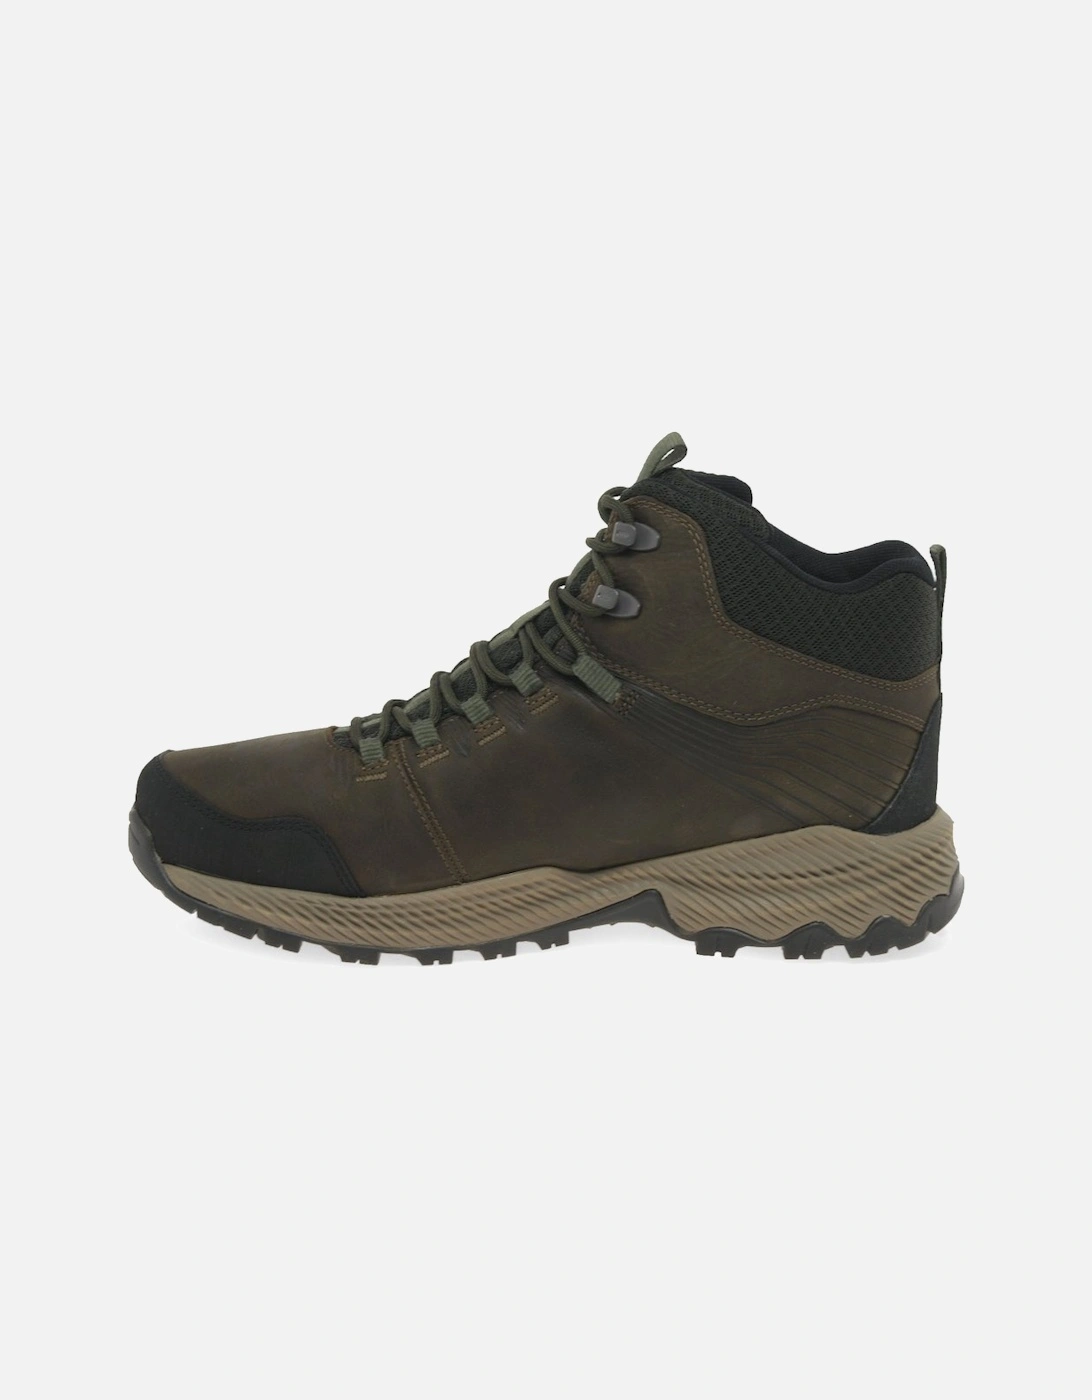 Forestbound Mid Mens Waterproof Boots